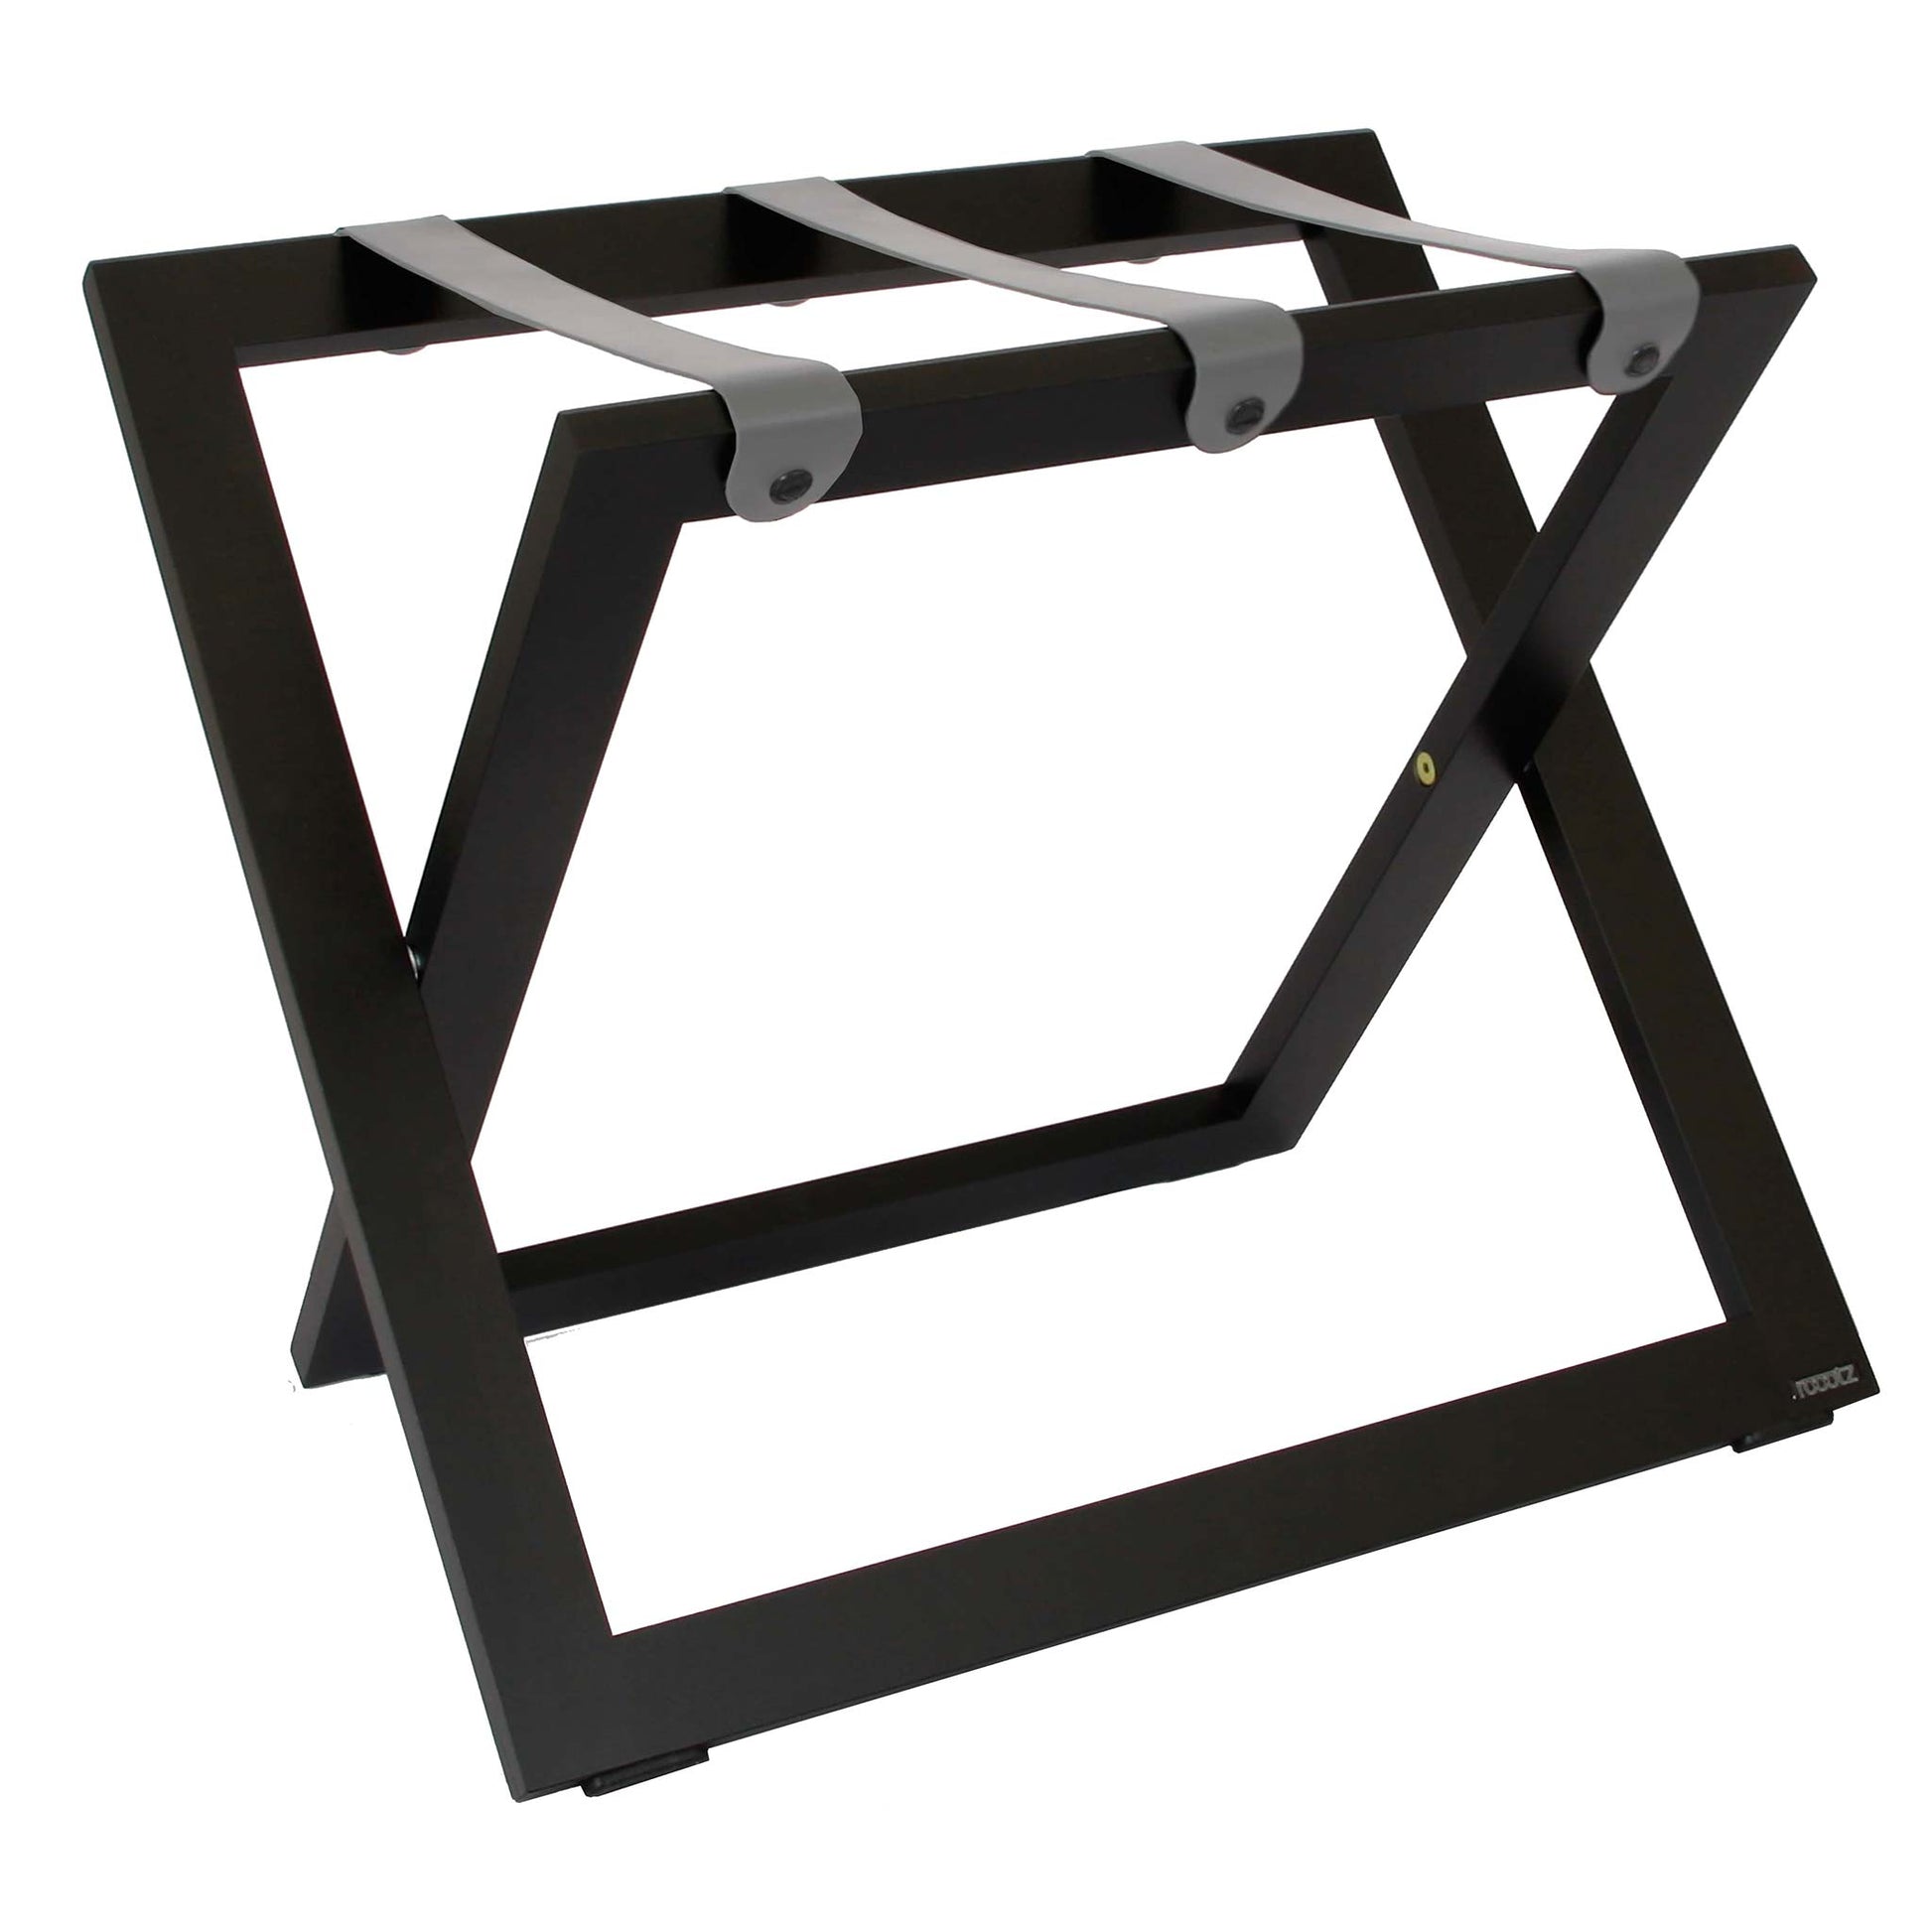 Roootz compact black wooden hotel luggage rack with grey leather straps